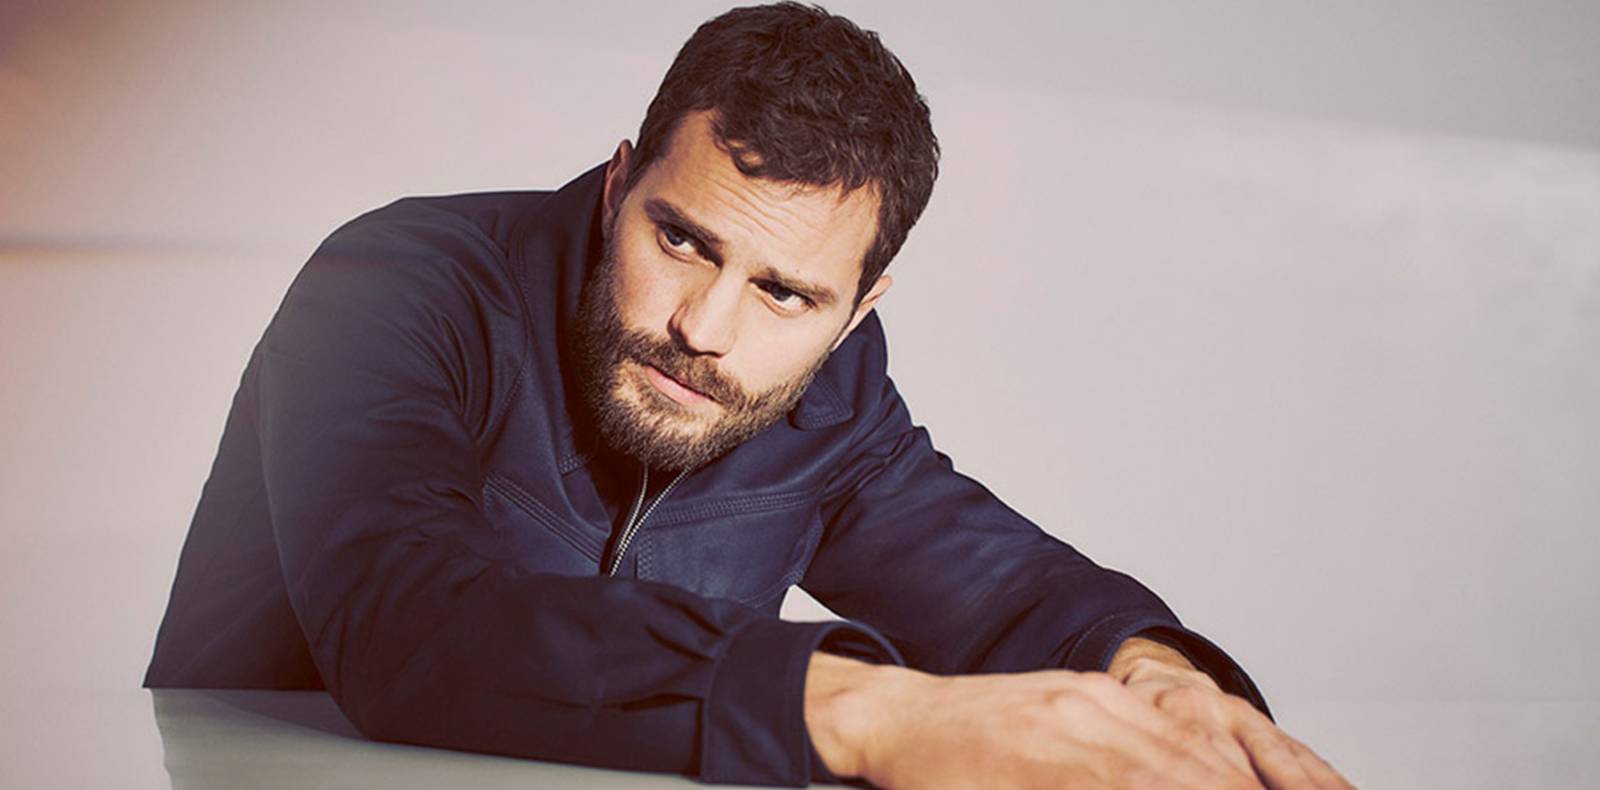 Couscous veeg gastheer “Playing a serial killer was the most difficult role of my carreer” : meet  with Jamie Dornan | Numéro Magazine